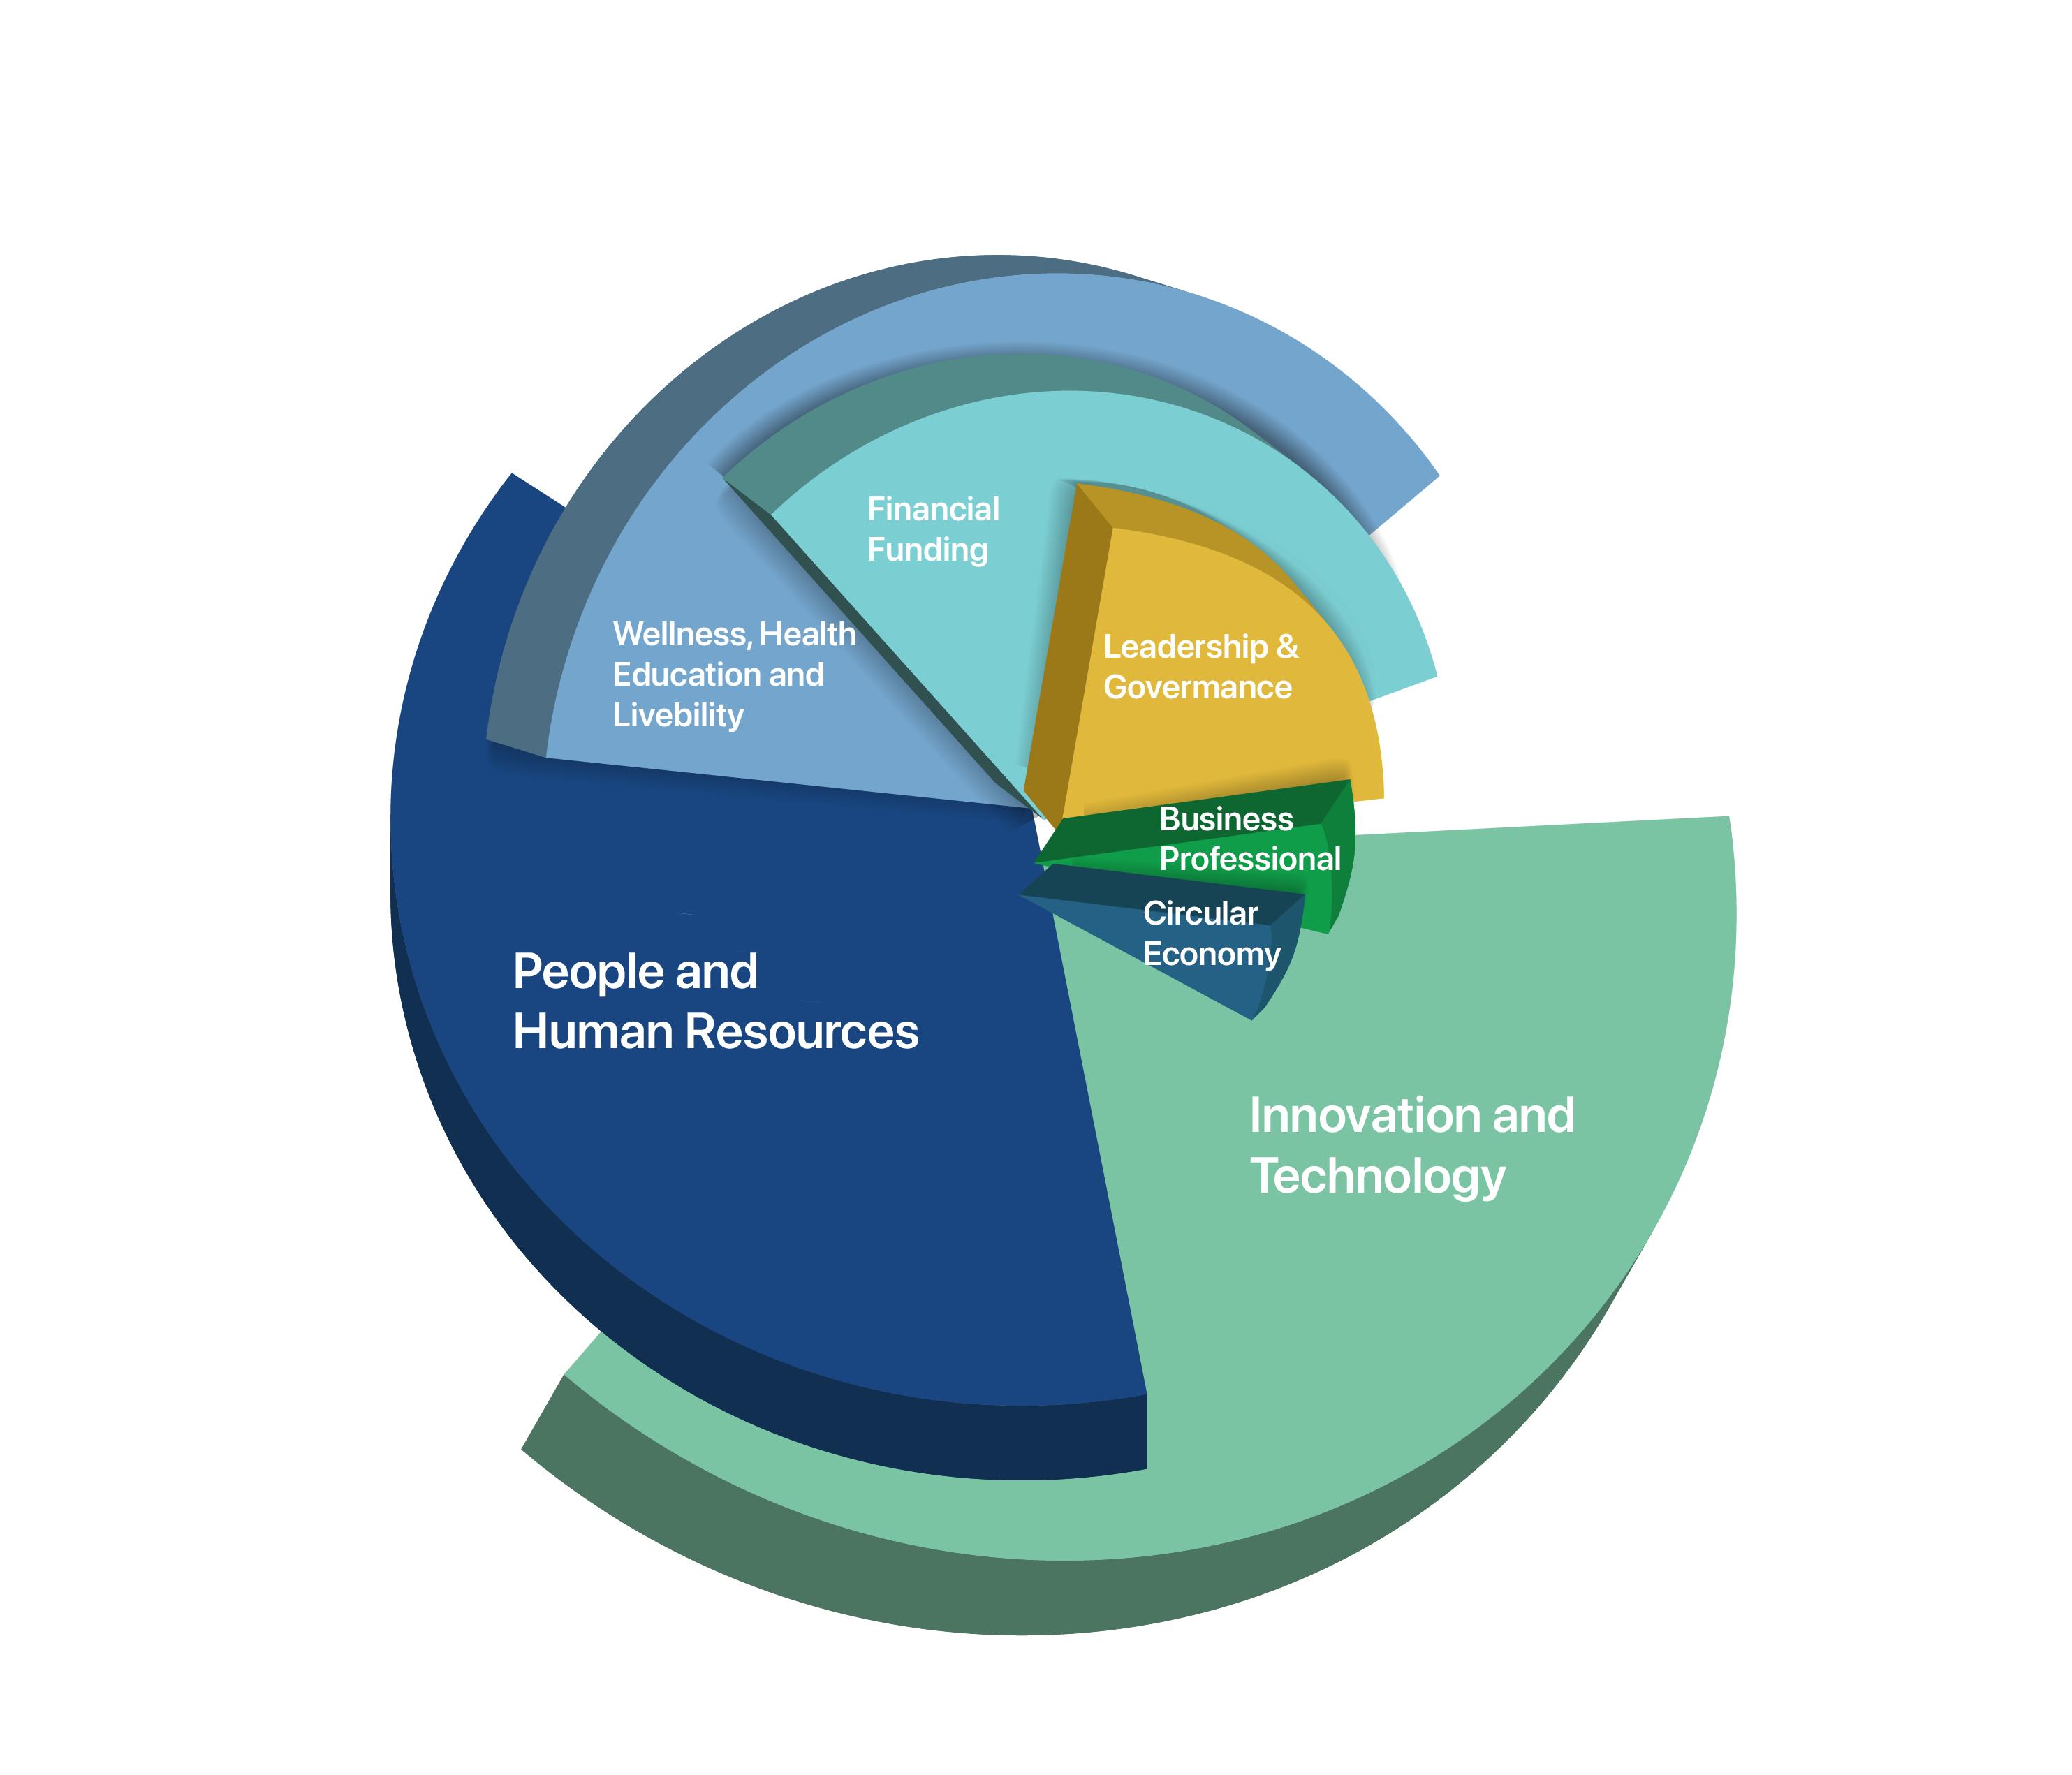 A pie graph consisting innovation and technology, people and human resources, wellness, health, education and liveability, financial funding, leadership and govermance, business professional and circular economy; with the largest proportion is innovation and technology, human resources, then followed by the rest